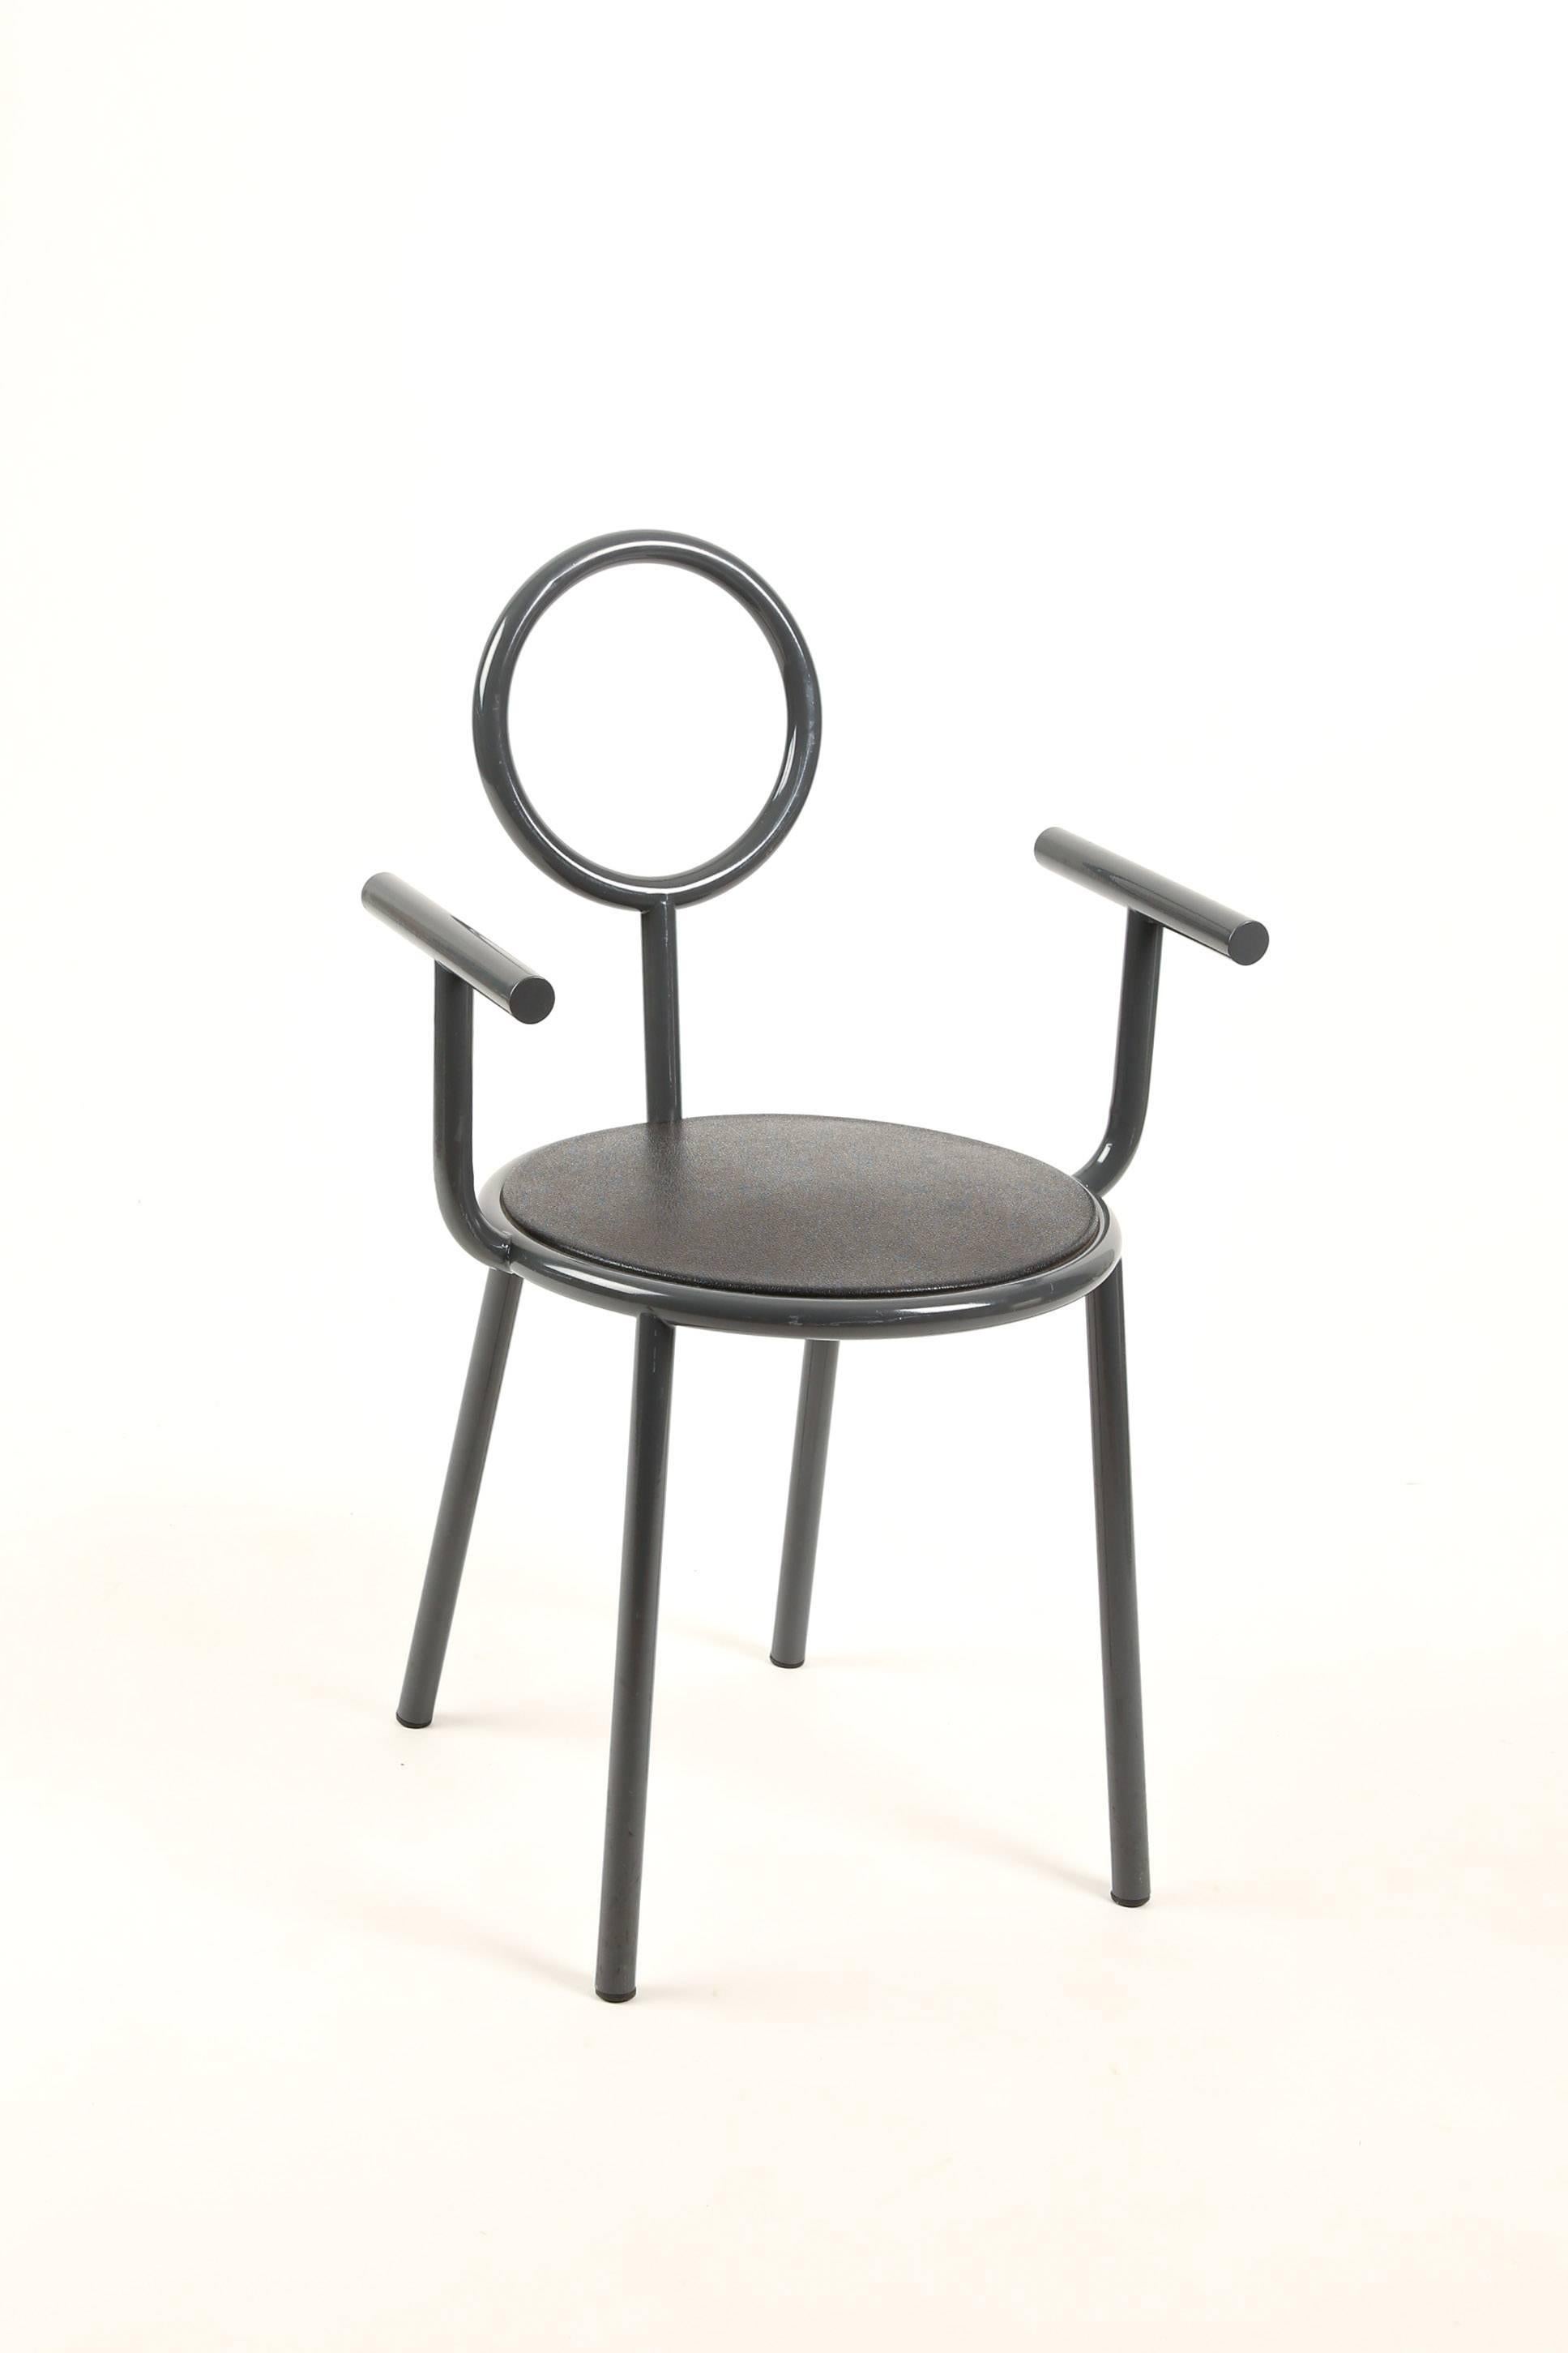 Memphis Group STELLINE MEMPHIS CHAIR designed by Alessandro Mendini for Elam, Italy